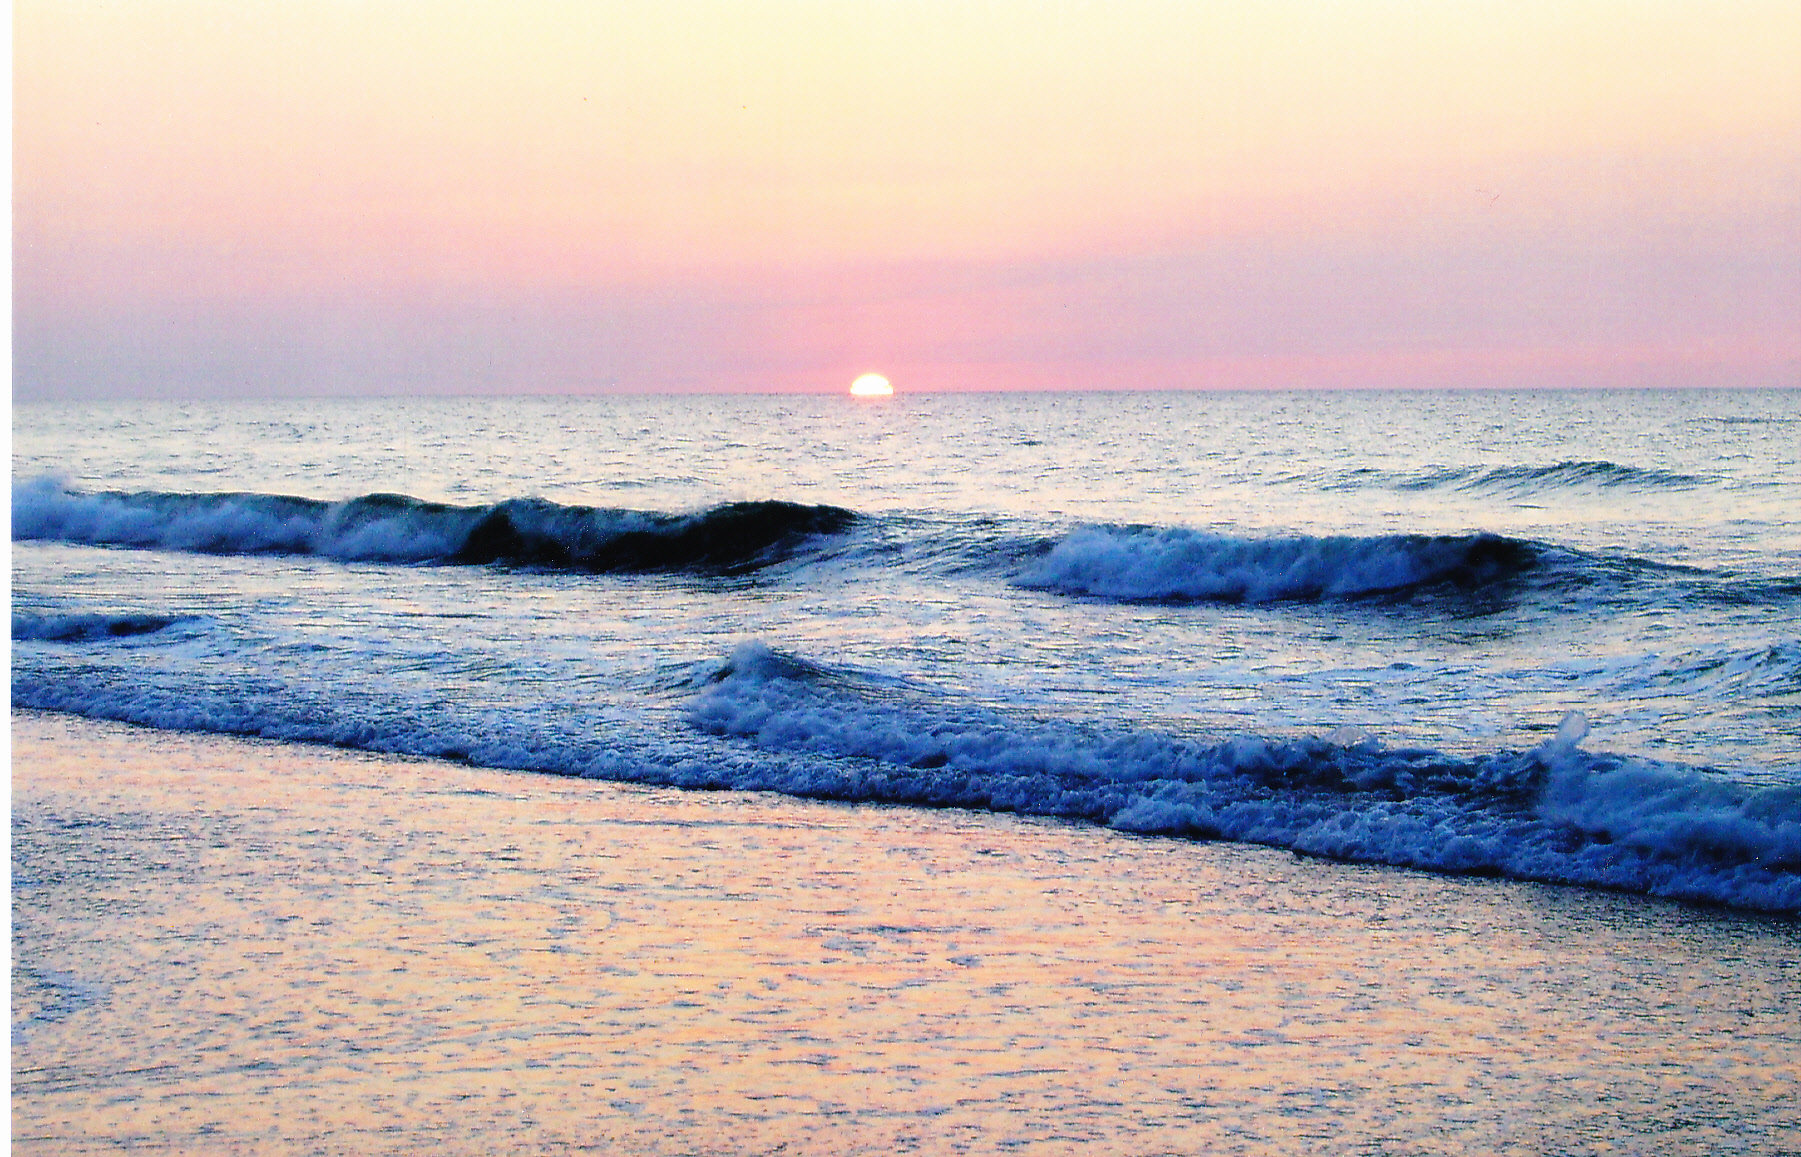 I went to Surfside Beach S.C. for the sunrise on Memorial Day!